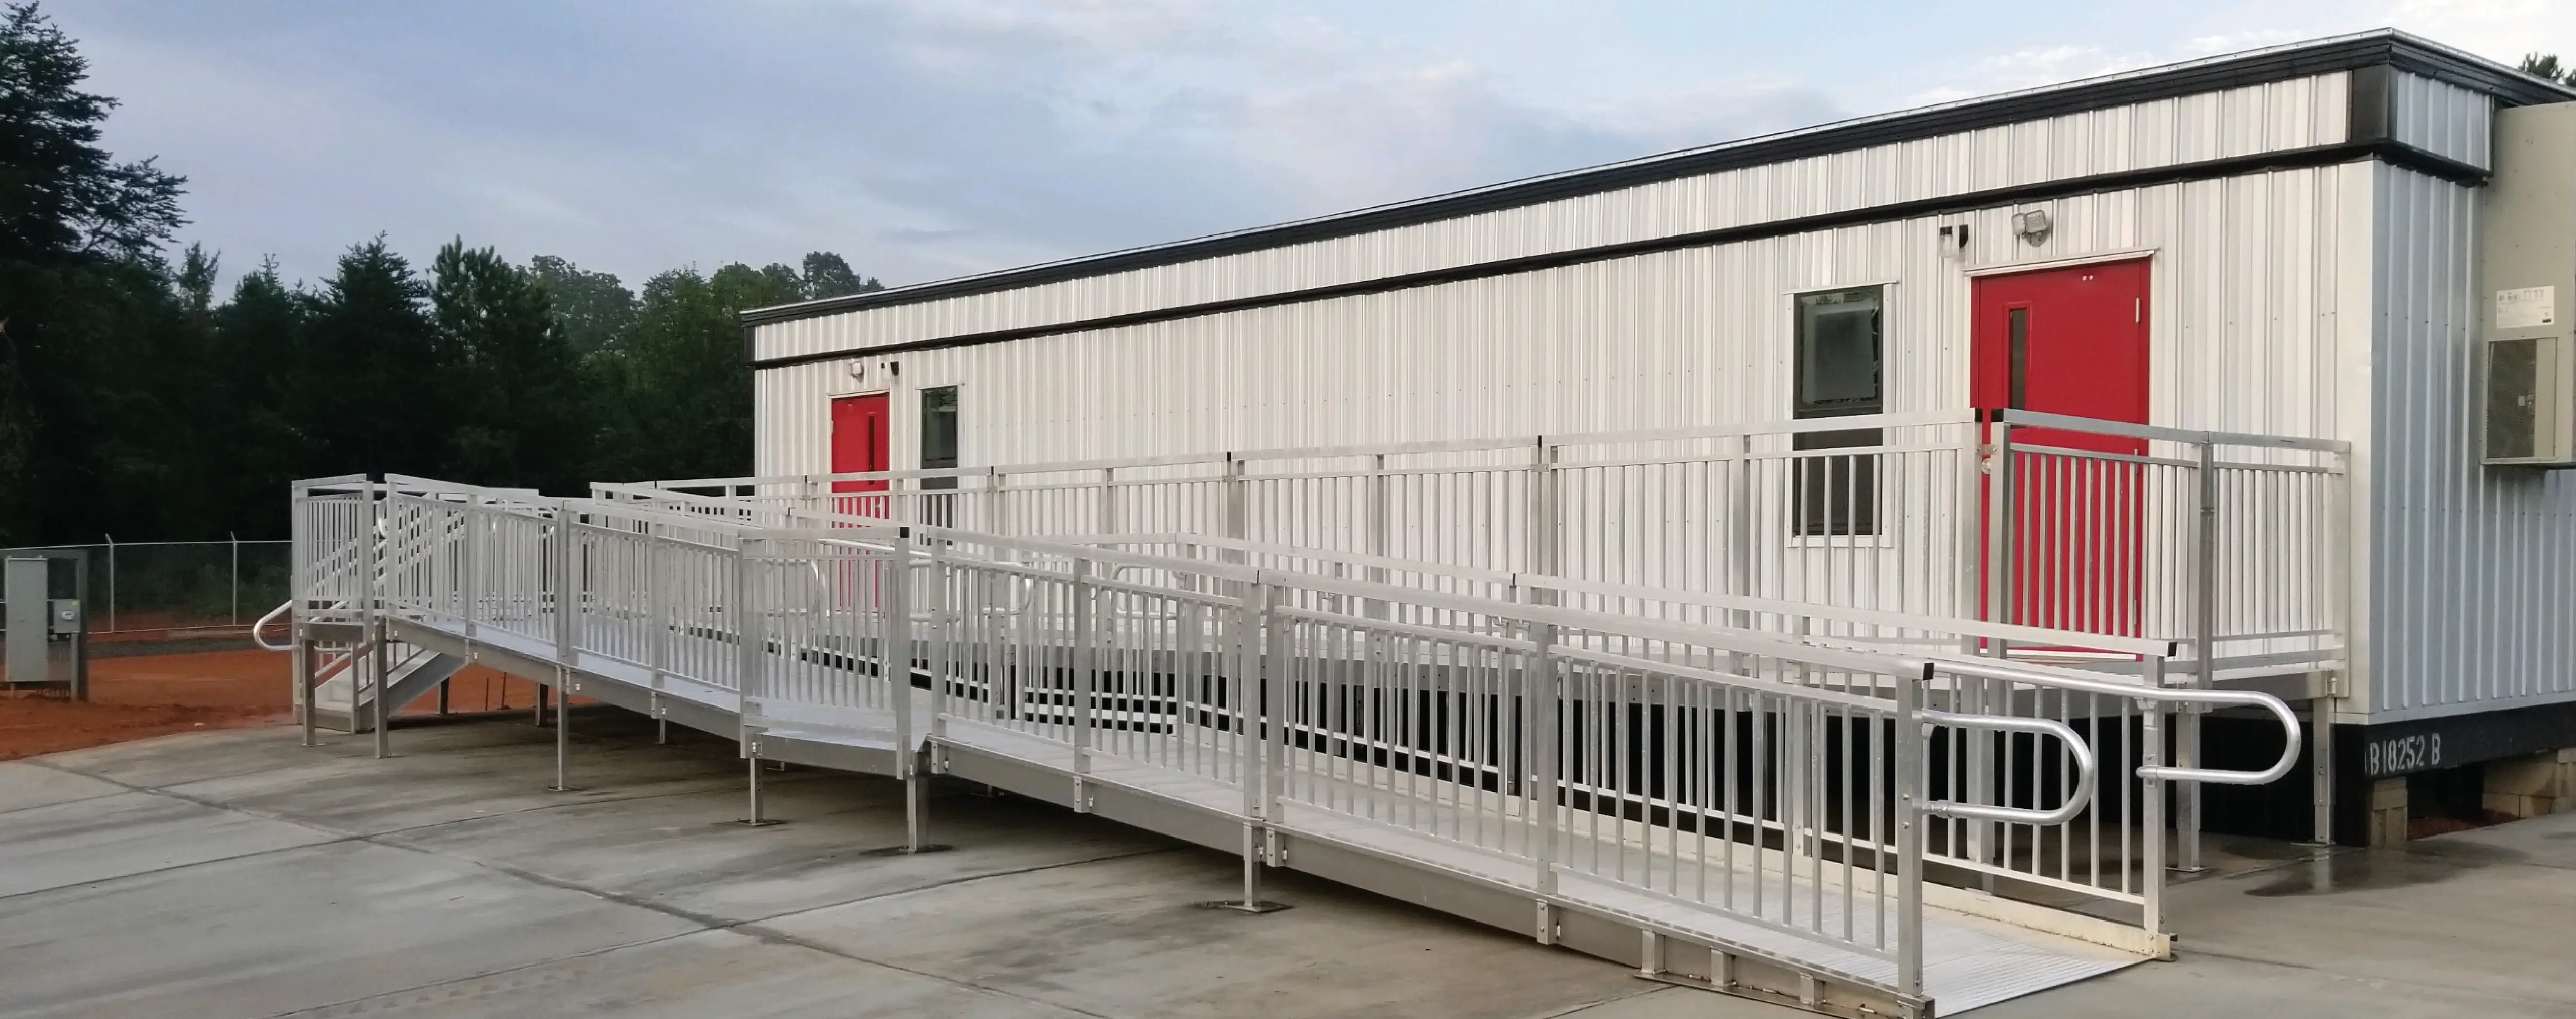 Modular Single Classroom for Rent, Lease or Buy 1